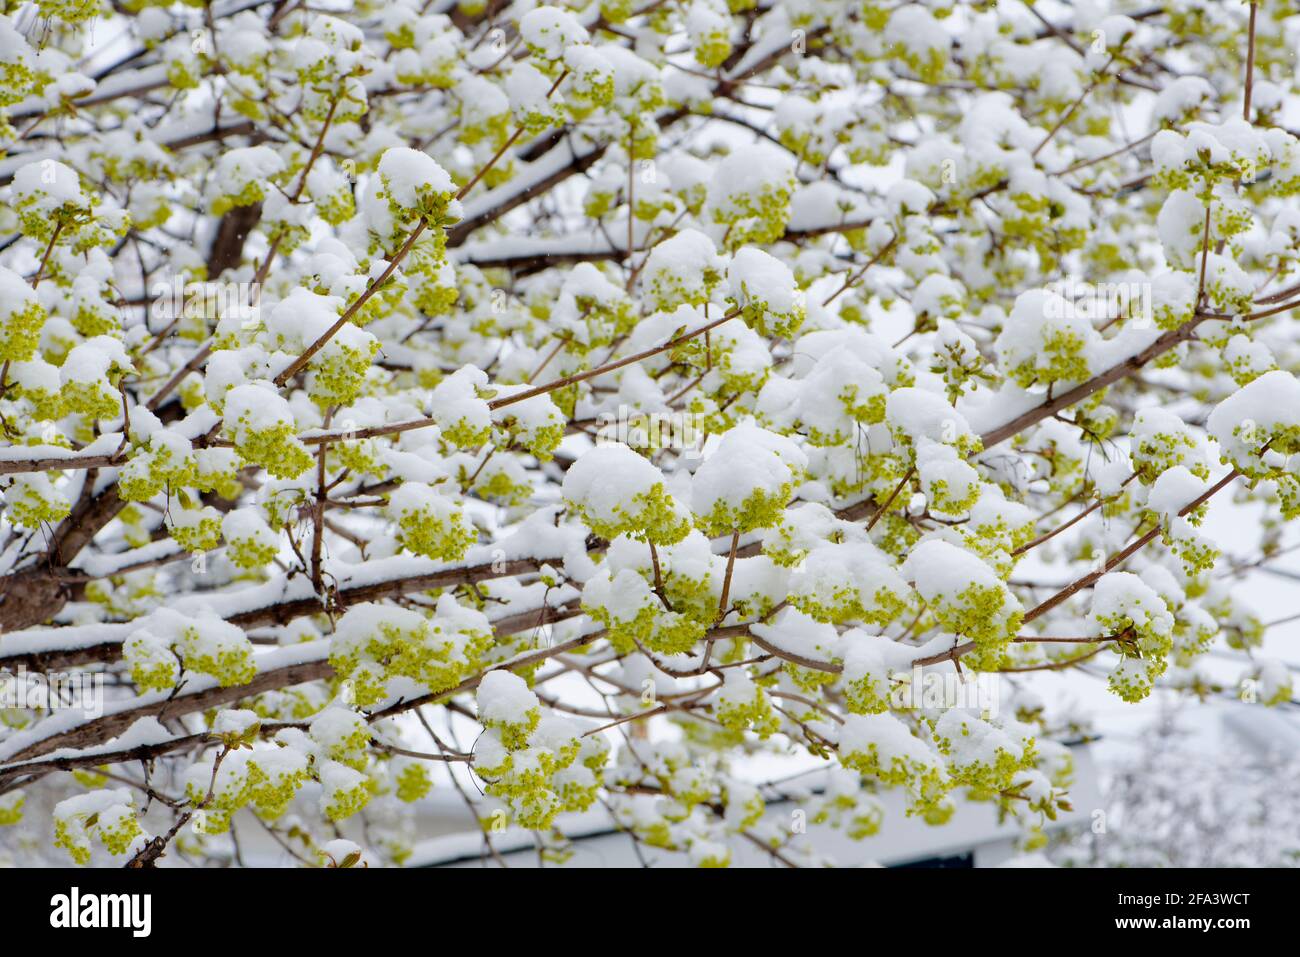 Maple blossoms covered in snow after an early spring snowfall. Stock Photo